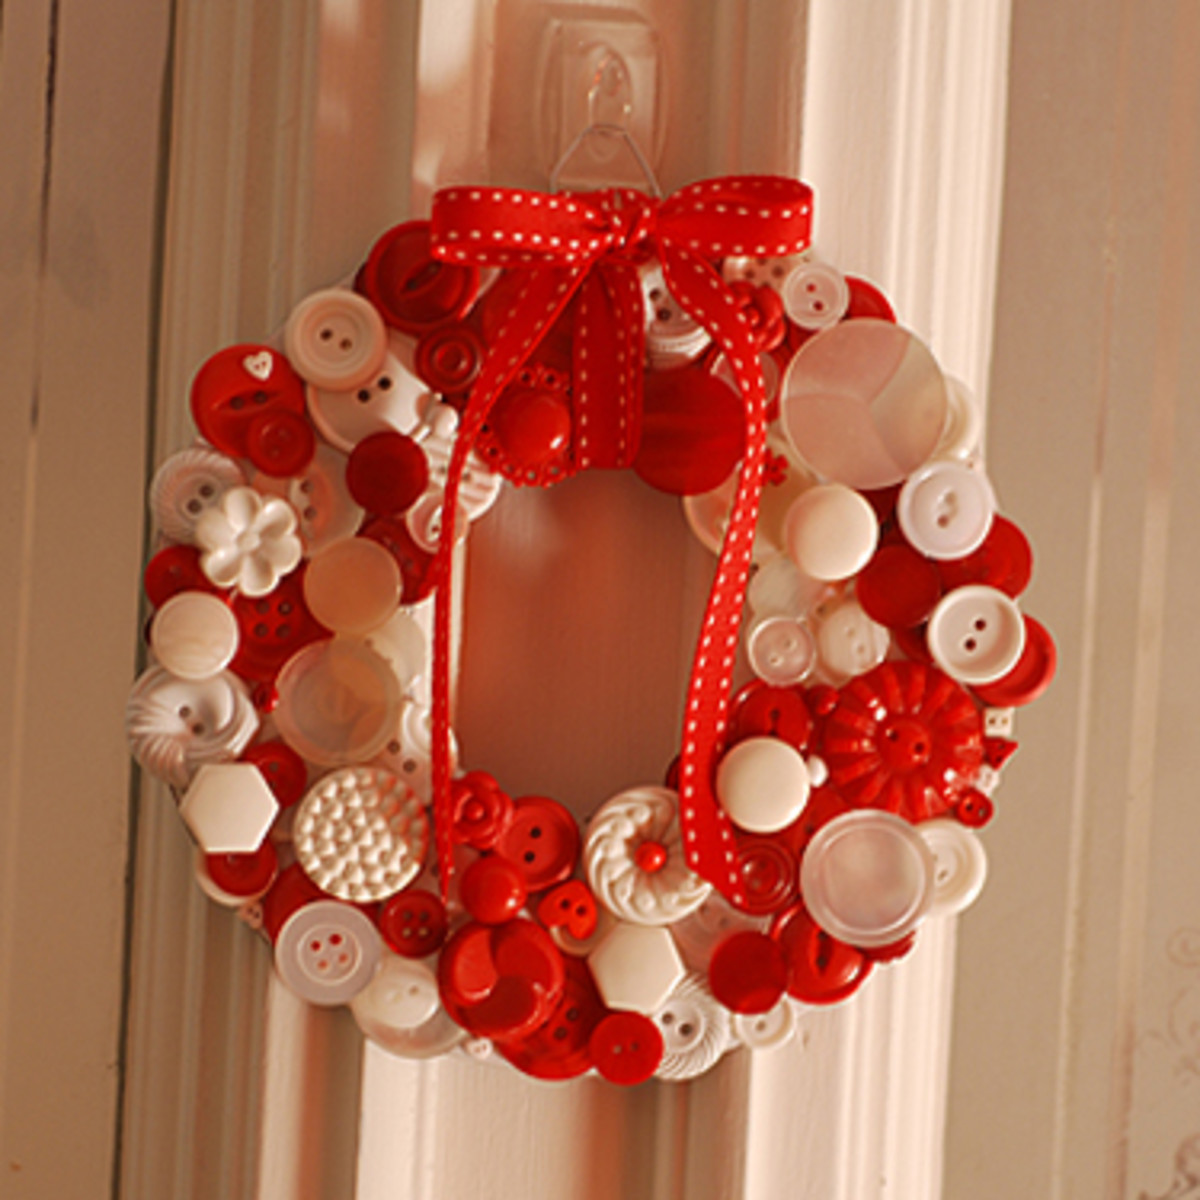 11 Button Wreath Craft Holiday Decorations